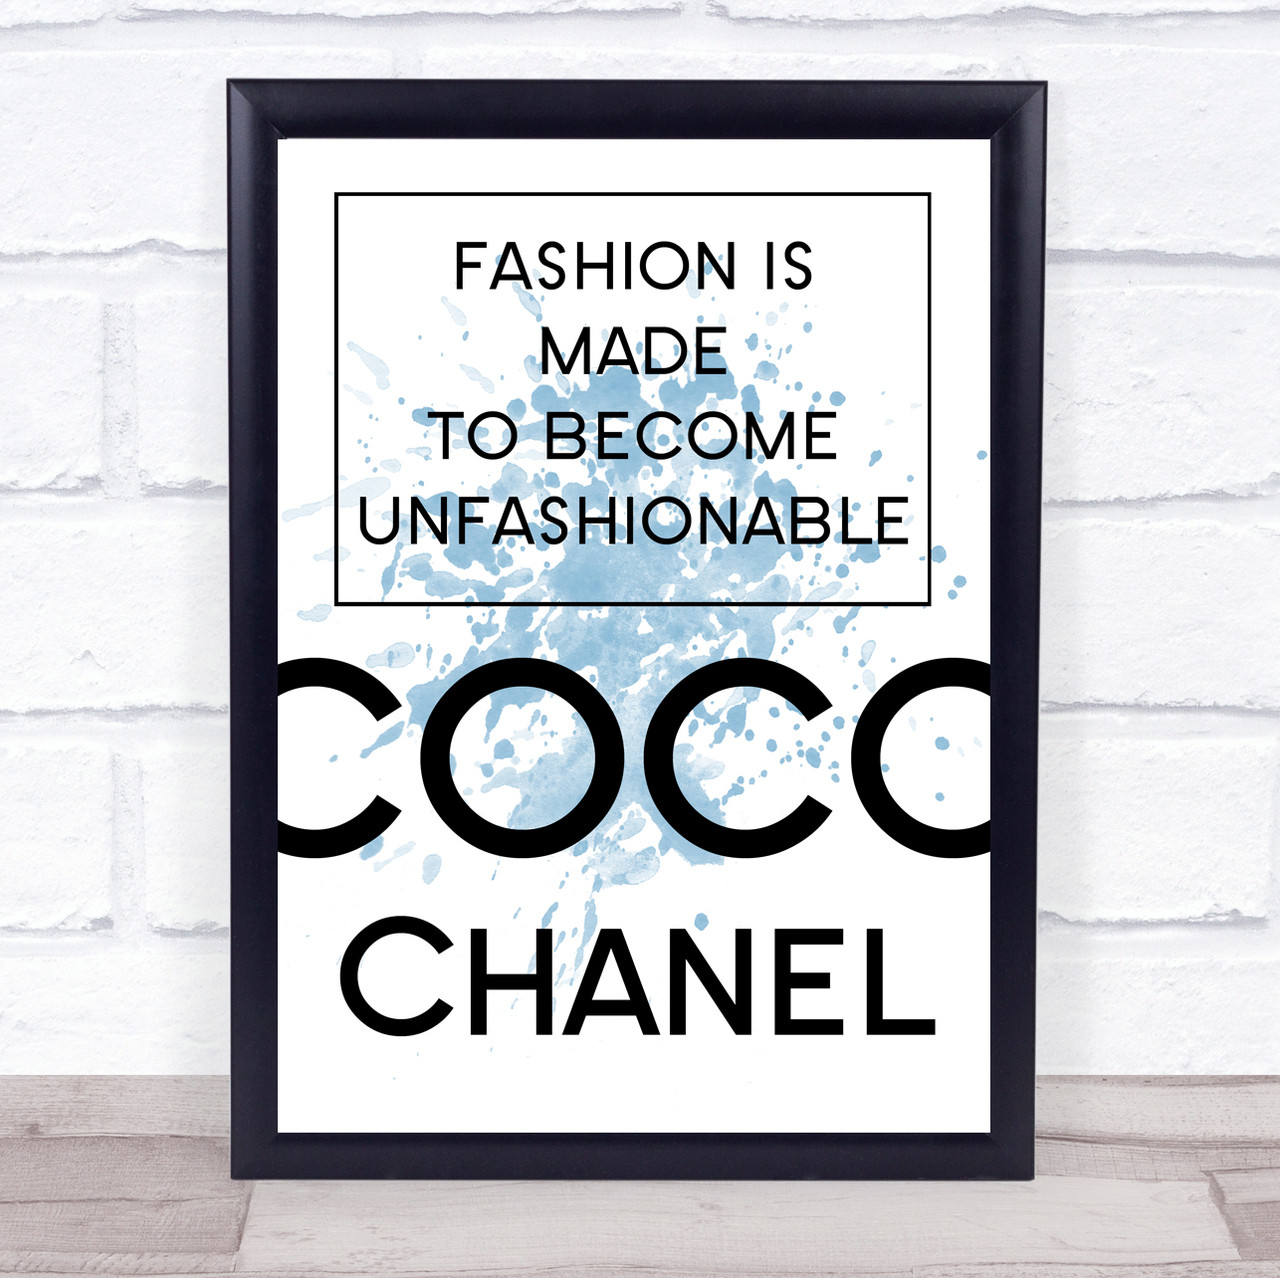 Framed Canvas Art (White Floating Frame) - Coco Chanel by Kahri ( People > celebrities > Models & Fashion Icons > Coco Chanel art) - 26x26 in